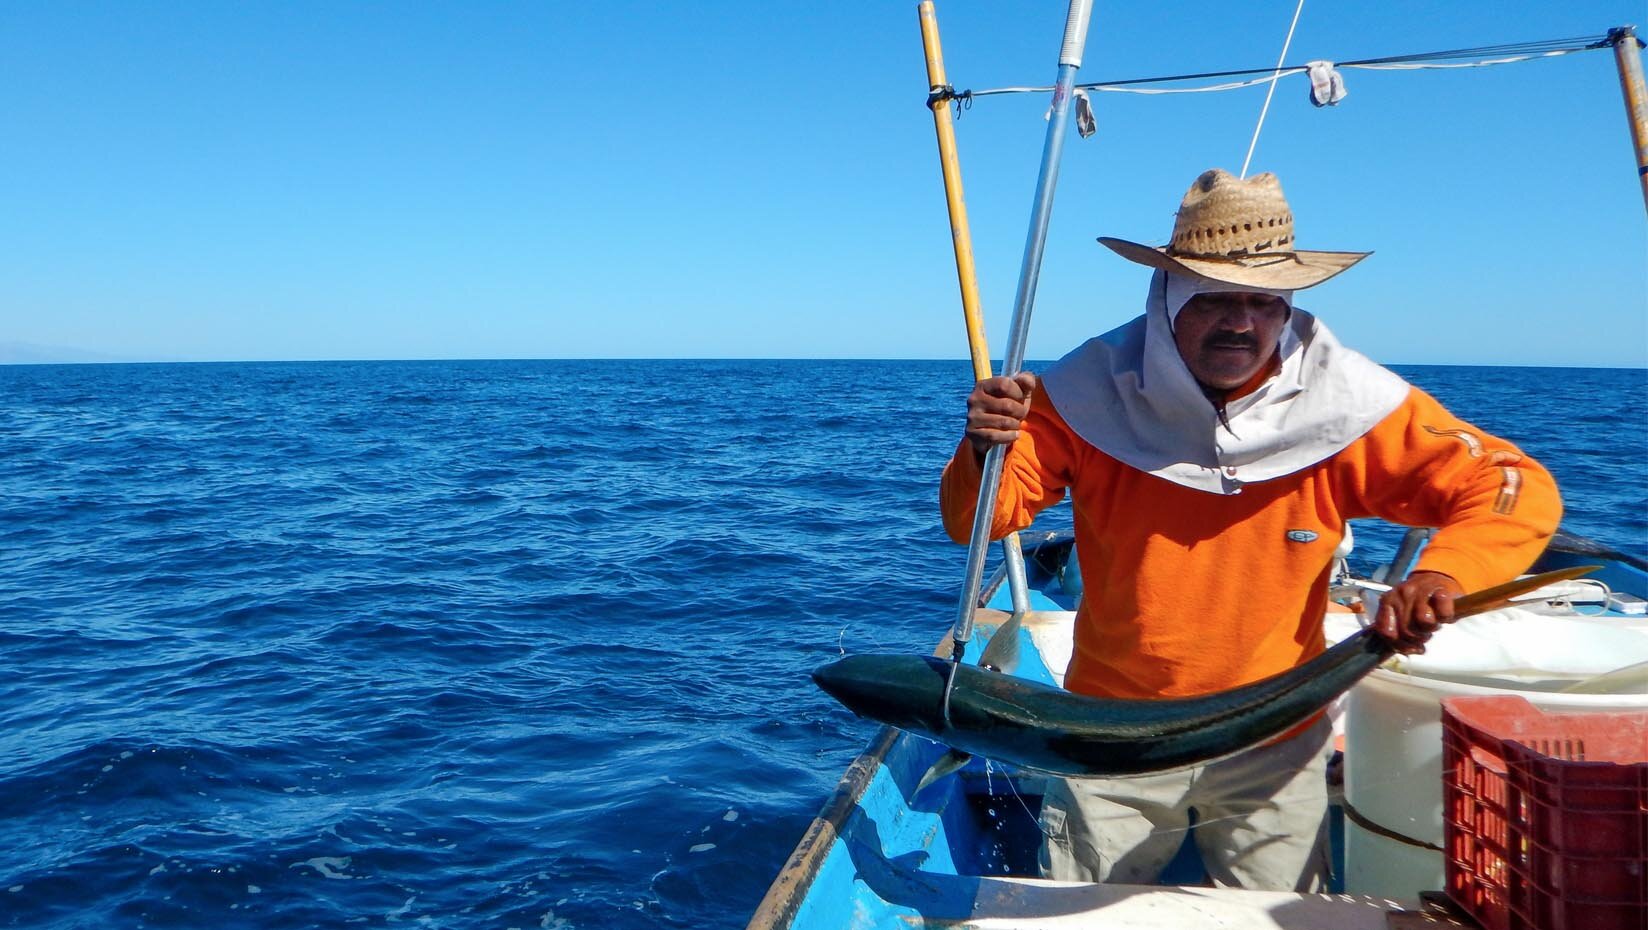 Business operations affect fishermen's resilience to climate